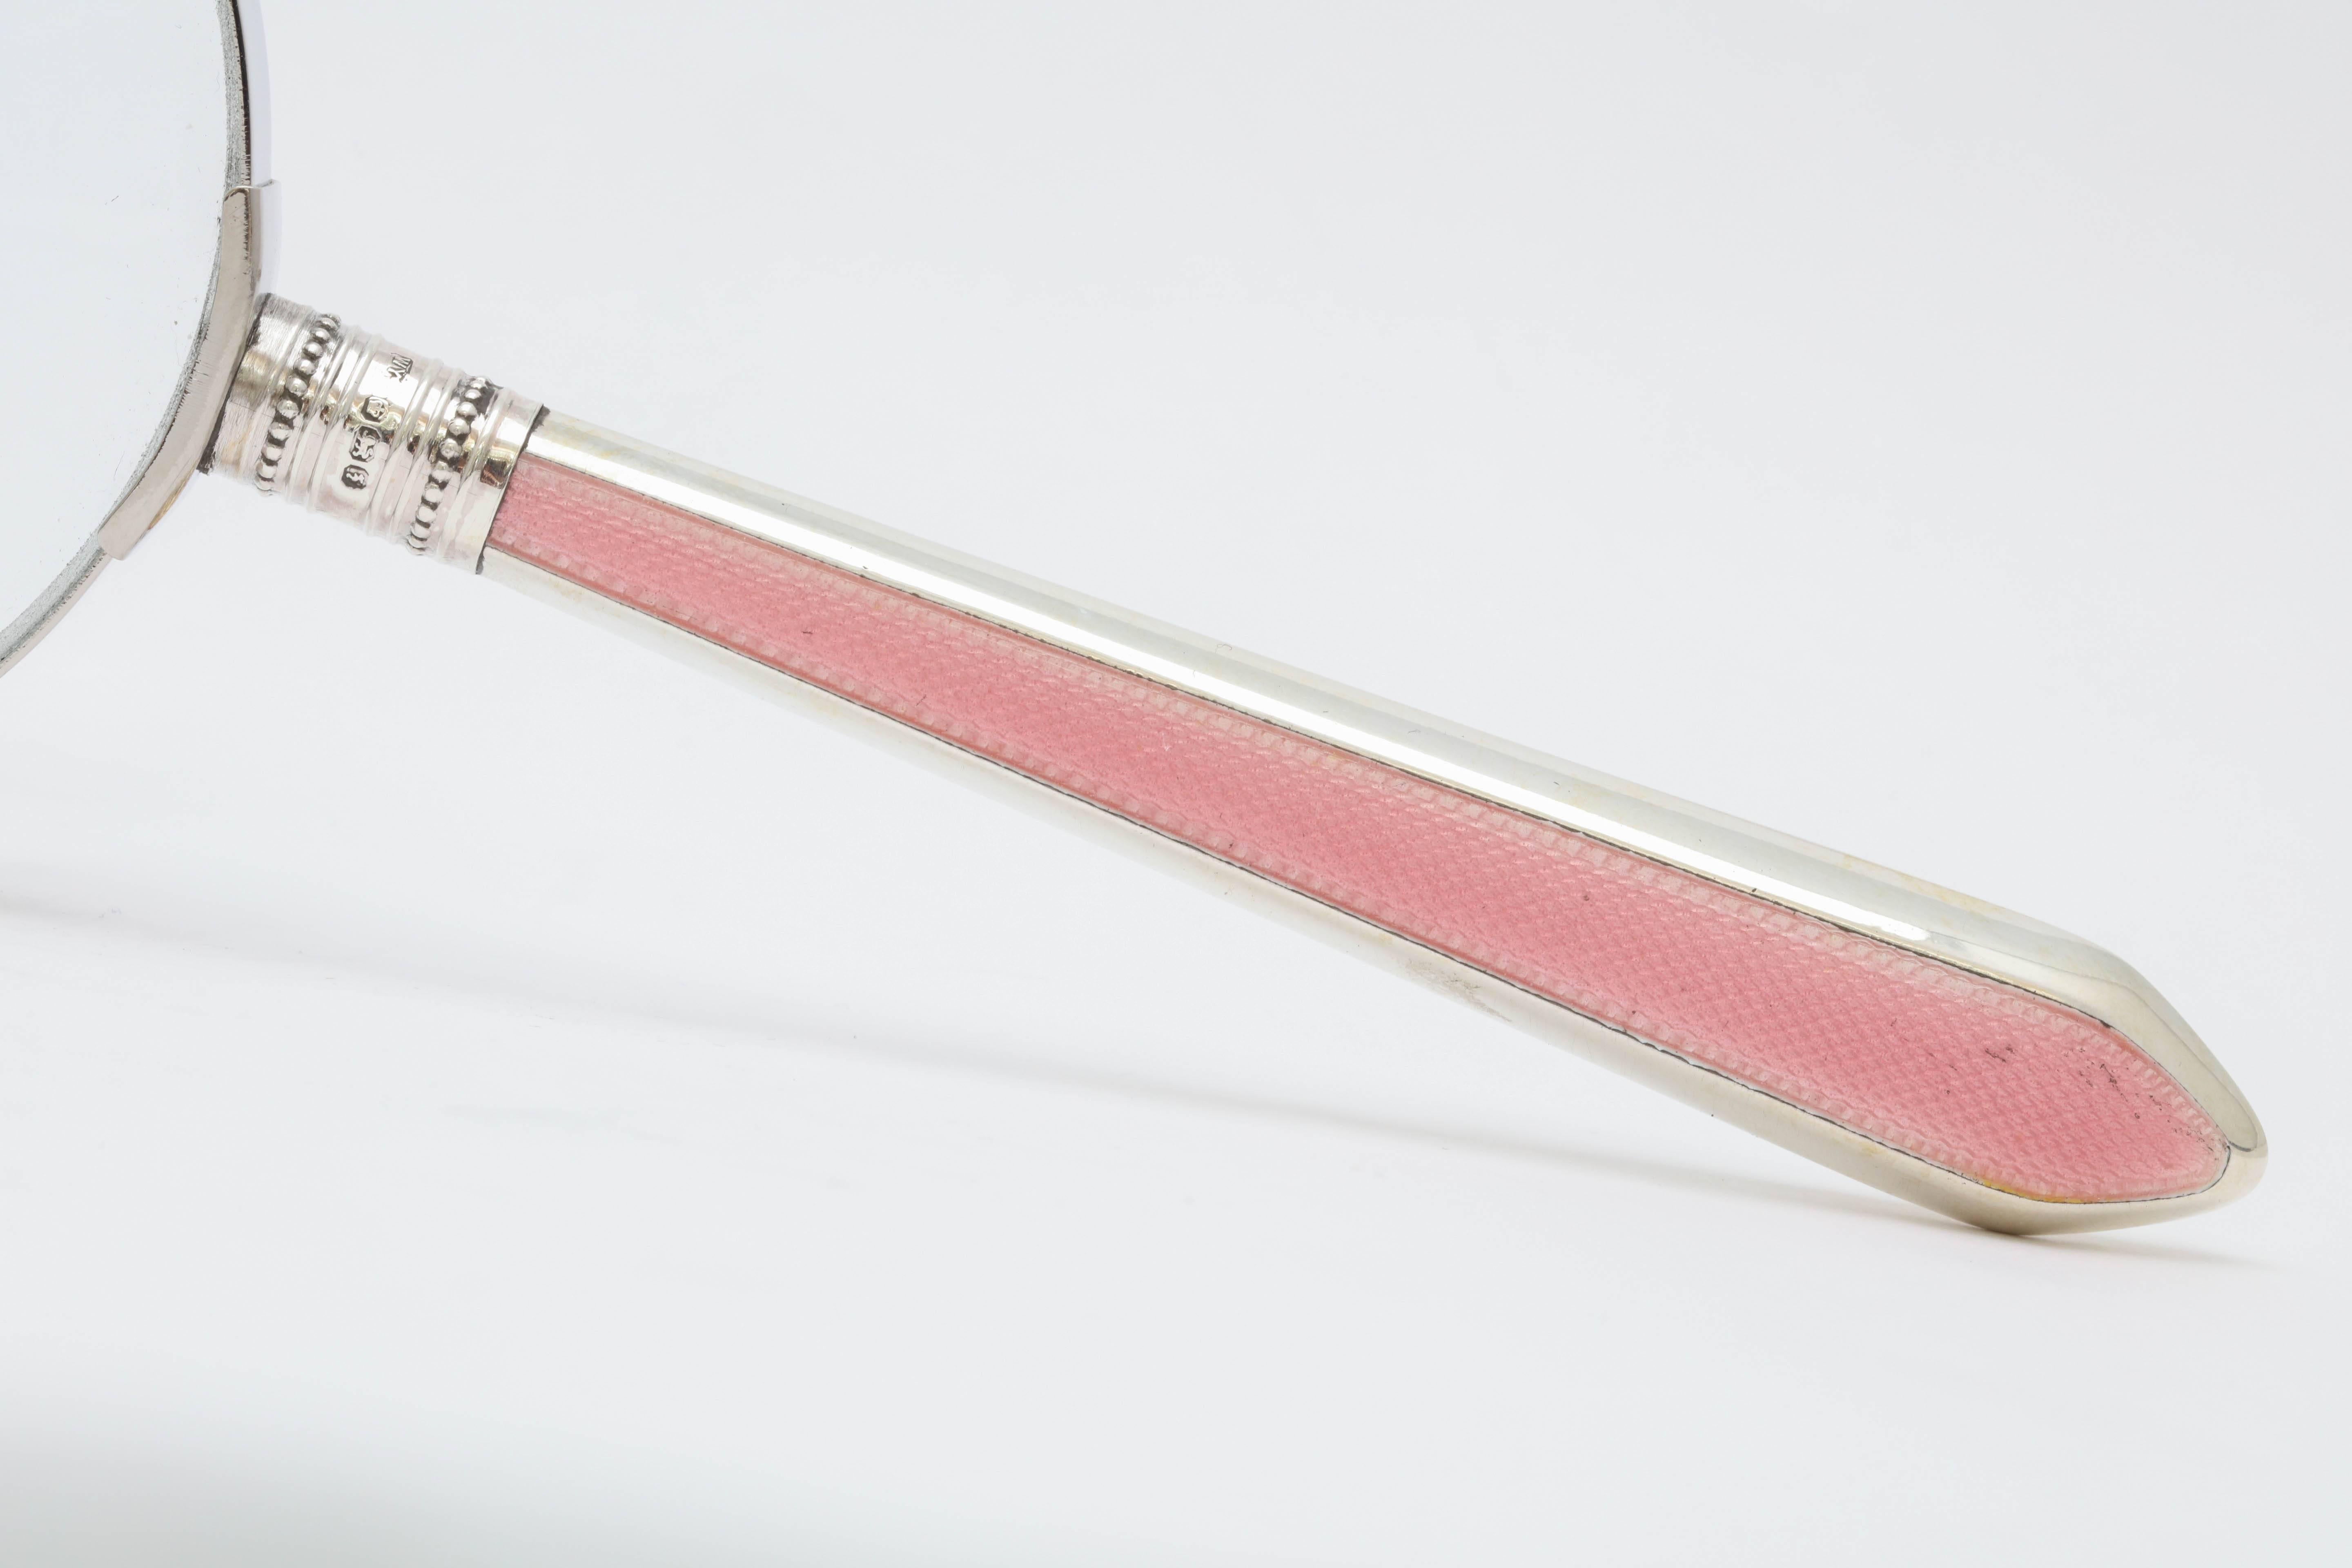 Art Deco, sterling silver handled, pink guilloche enamel mounted magnifying glass, Sheffield, England, 1917, William Yates - Maker. Measures: 7 1/2 inches long x 3 1/8 inches diameter. Excellent condition.